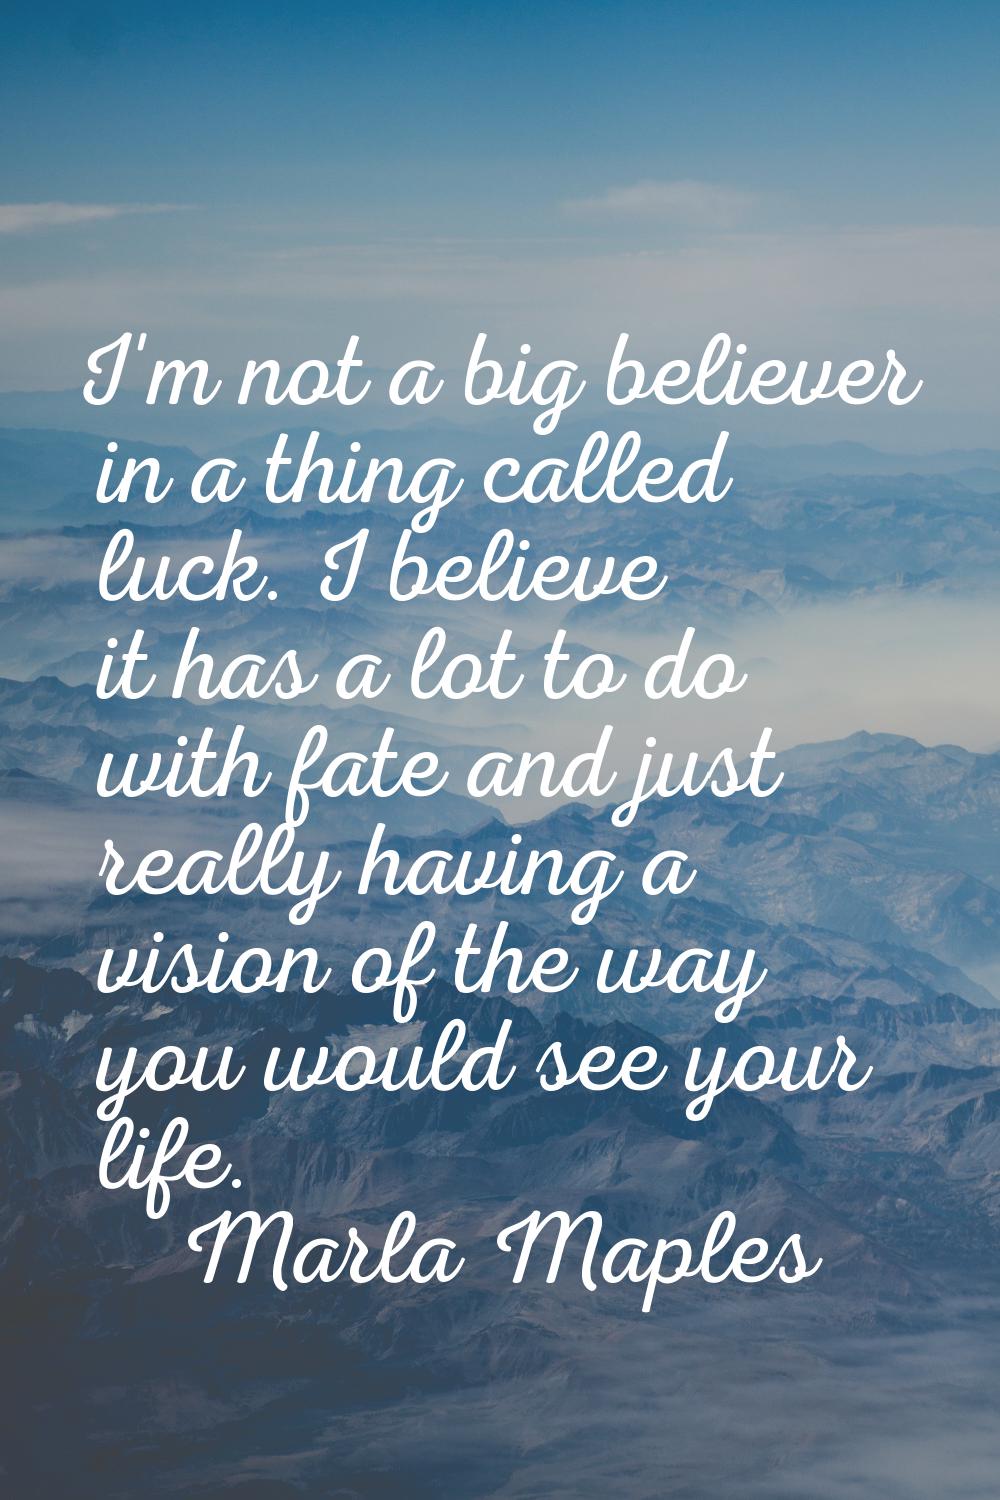 I'm not a big believer in a thing called luck. I believe it has a lot to do with fate and just real